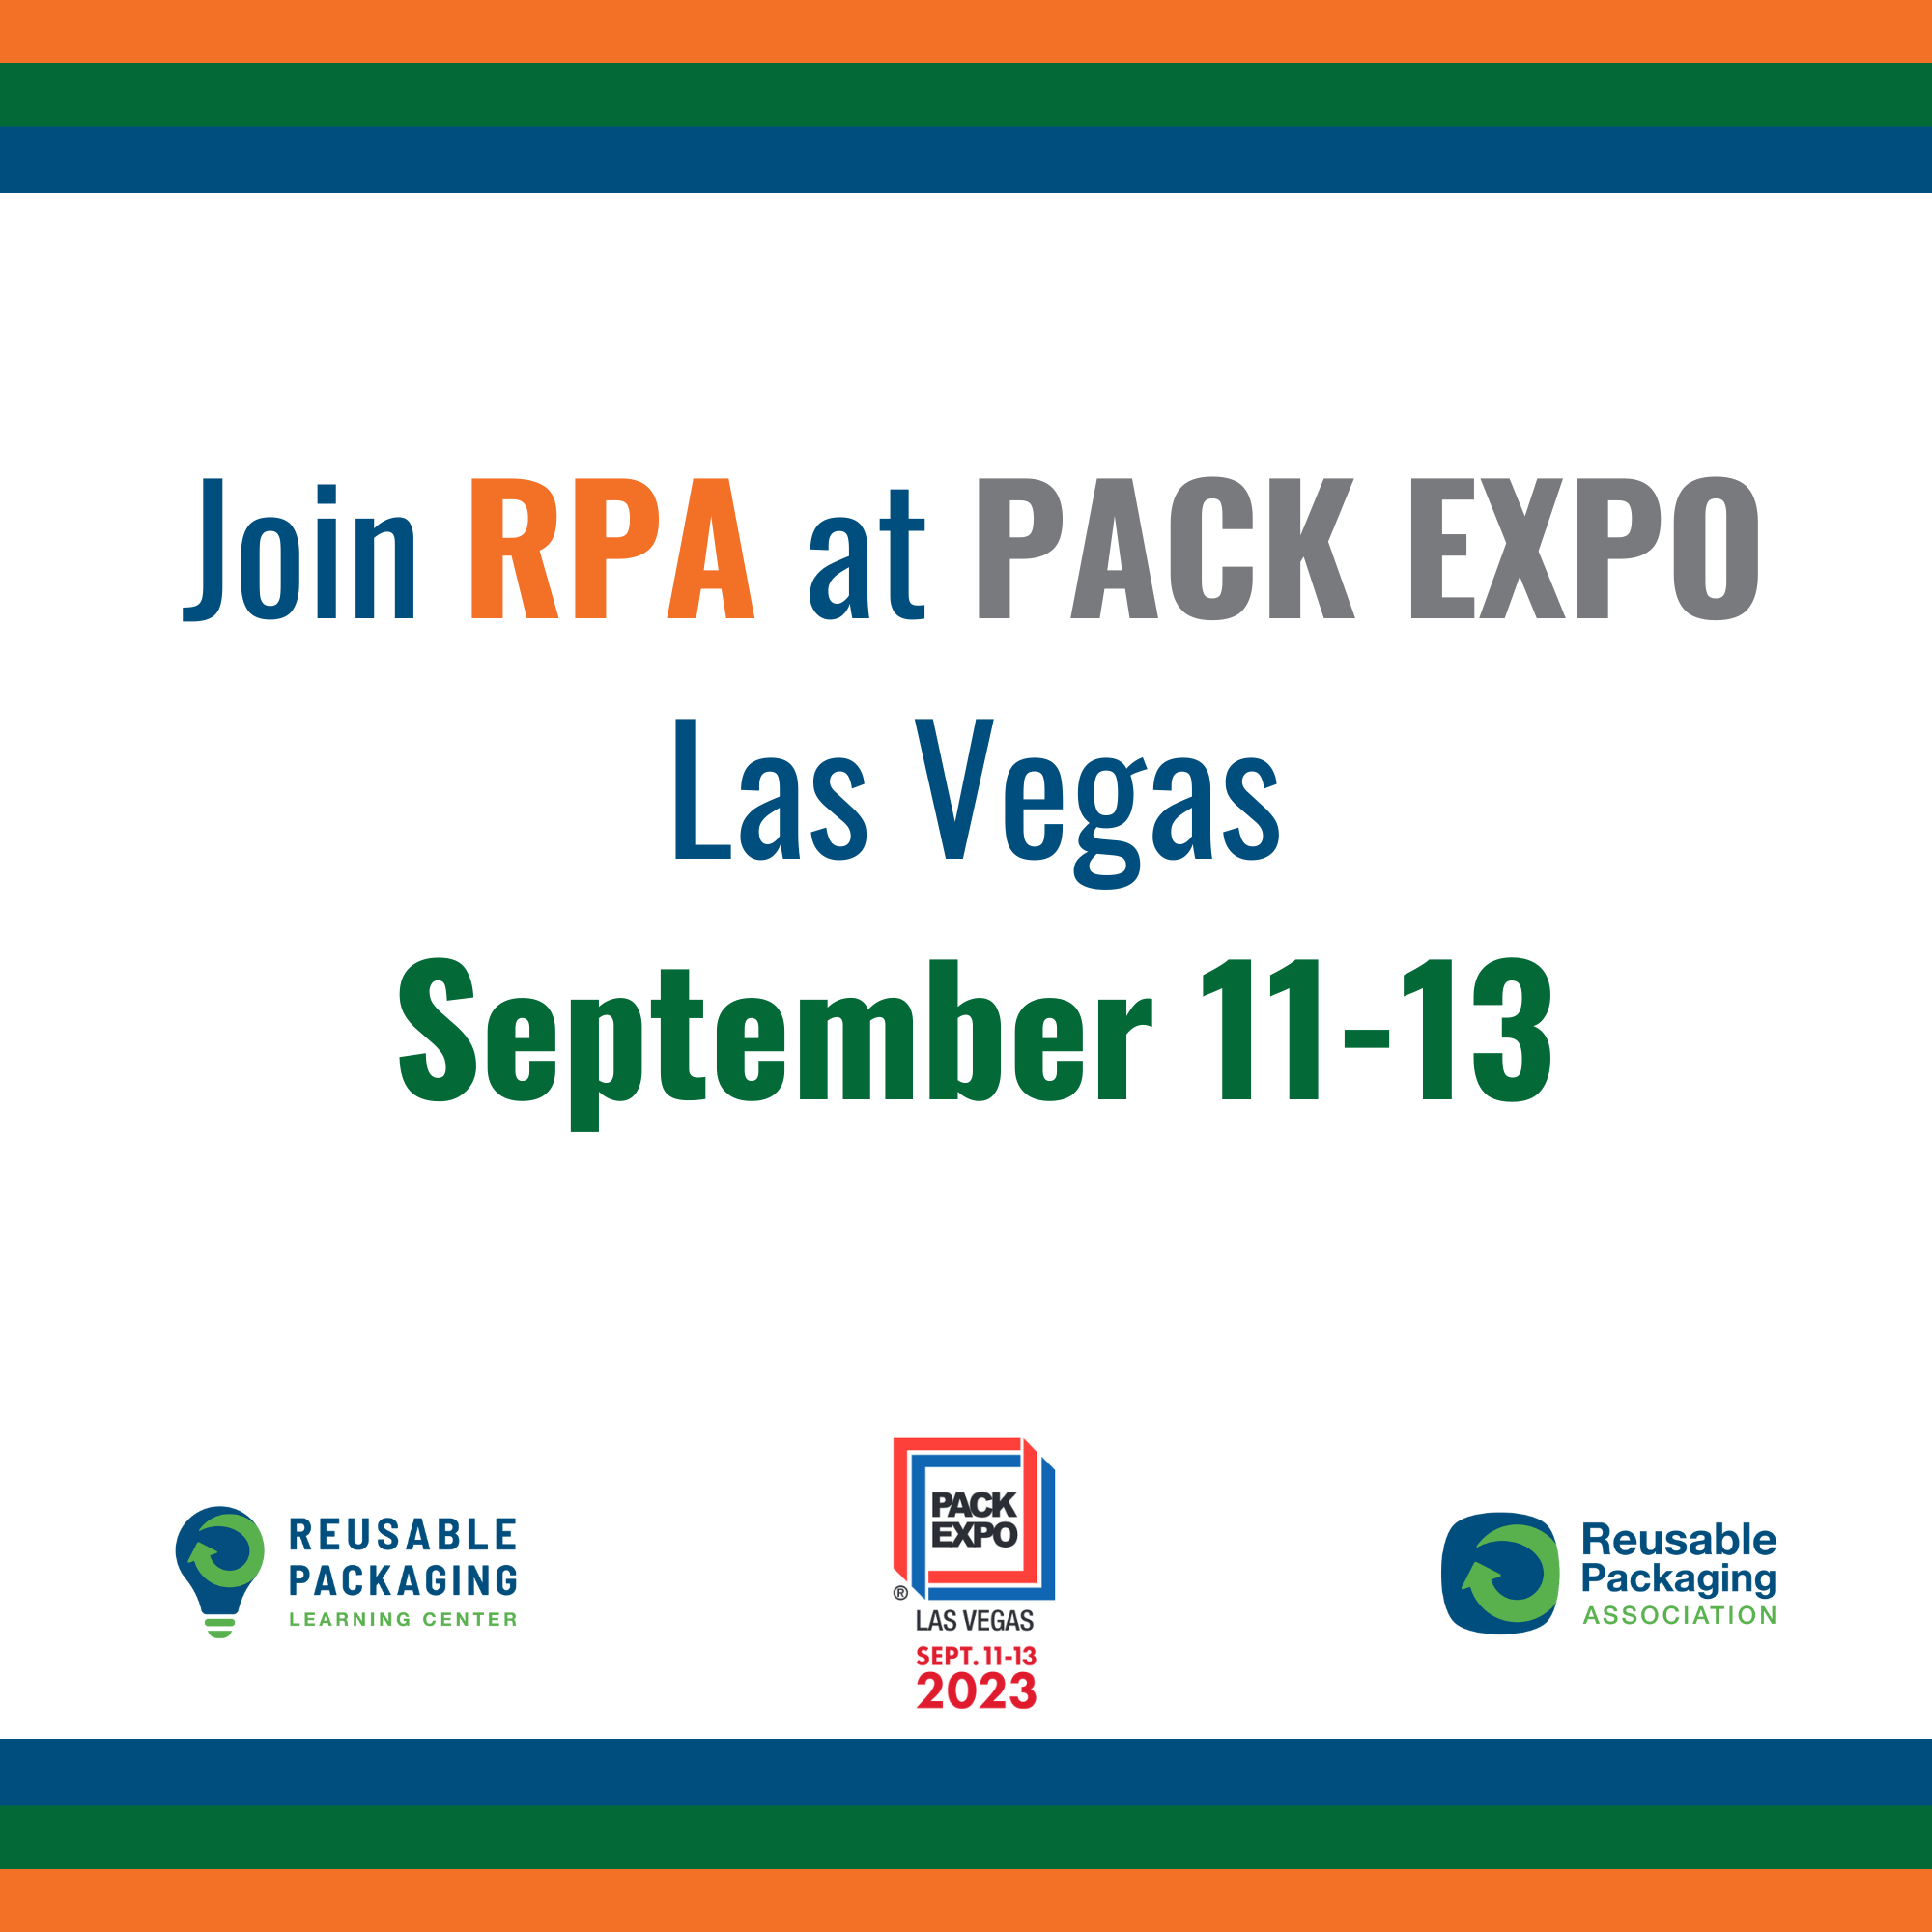 Reusable Packaging Association Set to Showcase Groundbreaking Solutions in the RPA Pavilion at Pack Expo Las Vegas 2023